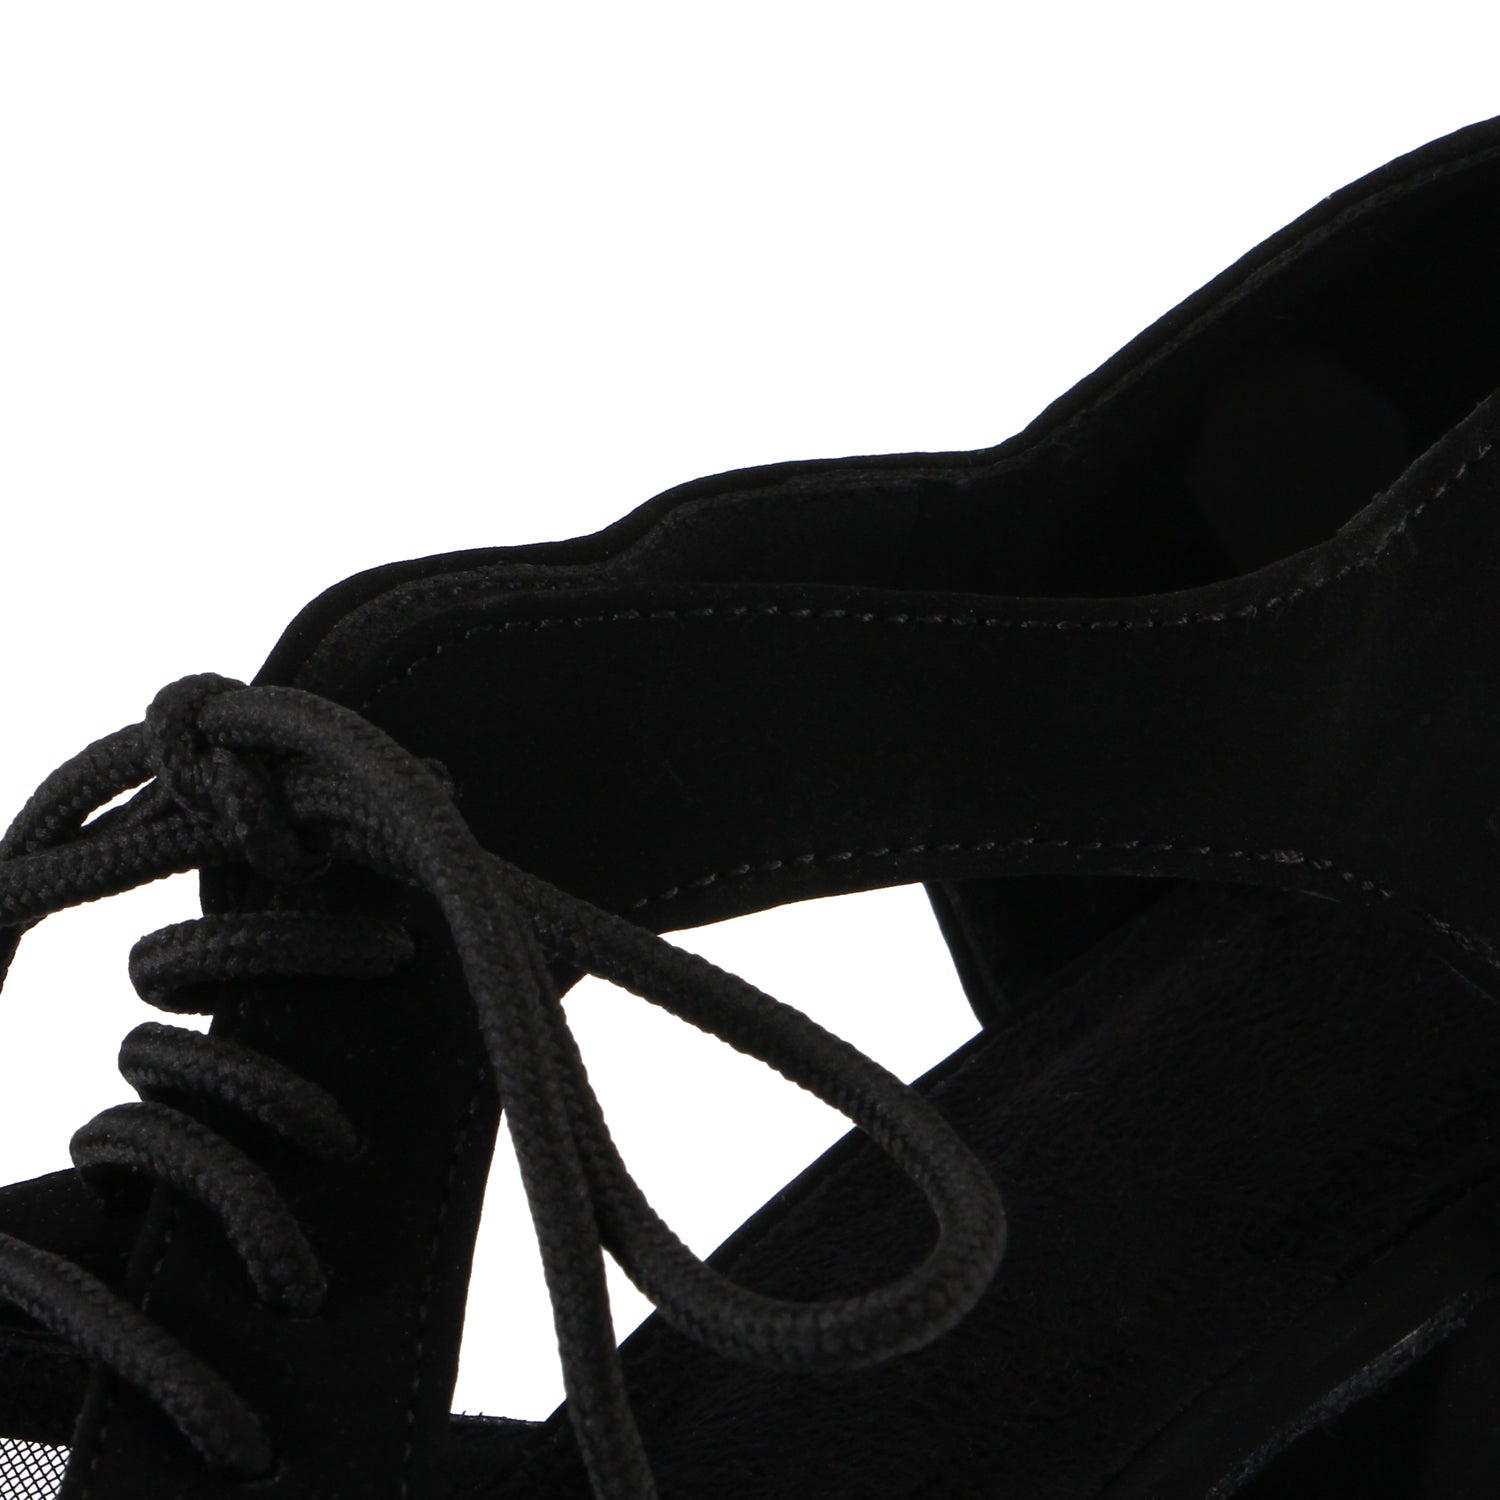 Women Ballroom Dancing Shoes with Suede Sole, Lace-up Open-toe Design in Black for Tango Latin Practice - PD-3002A1